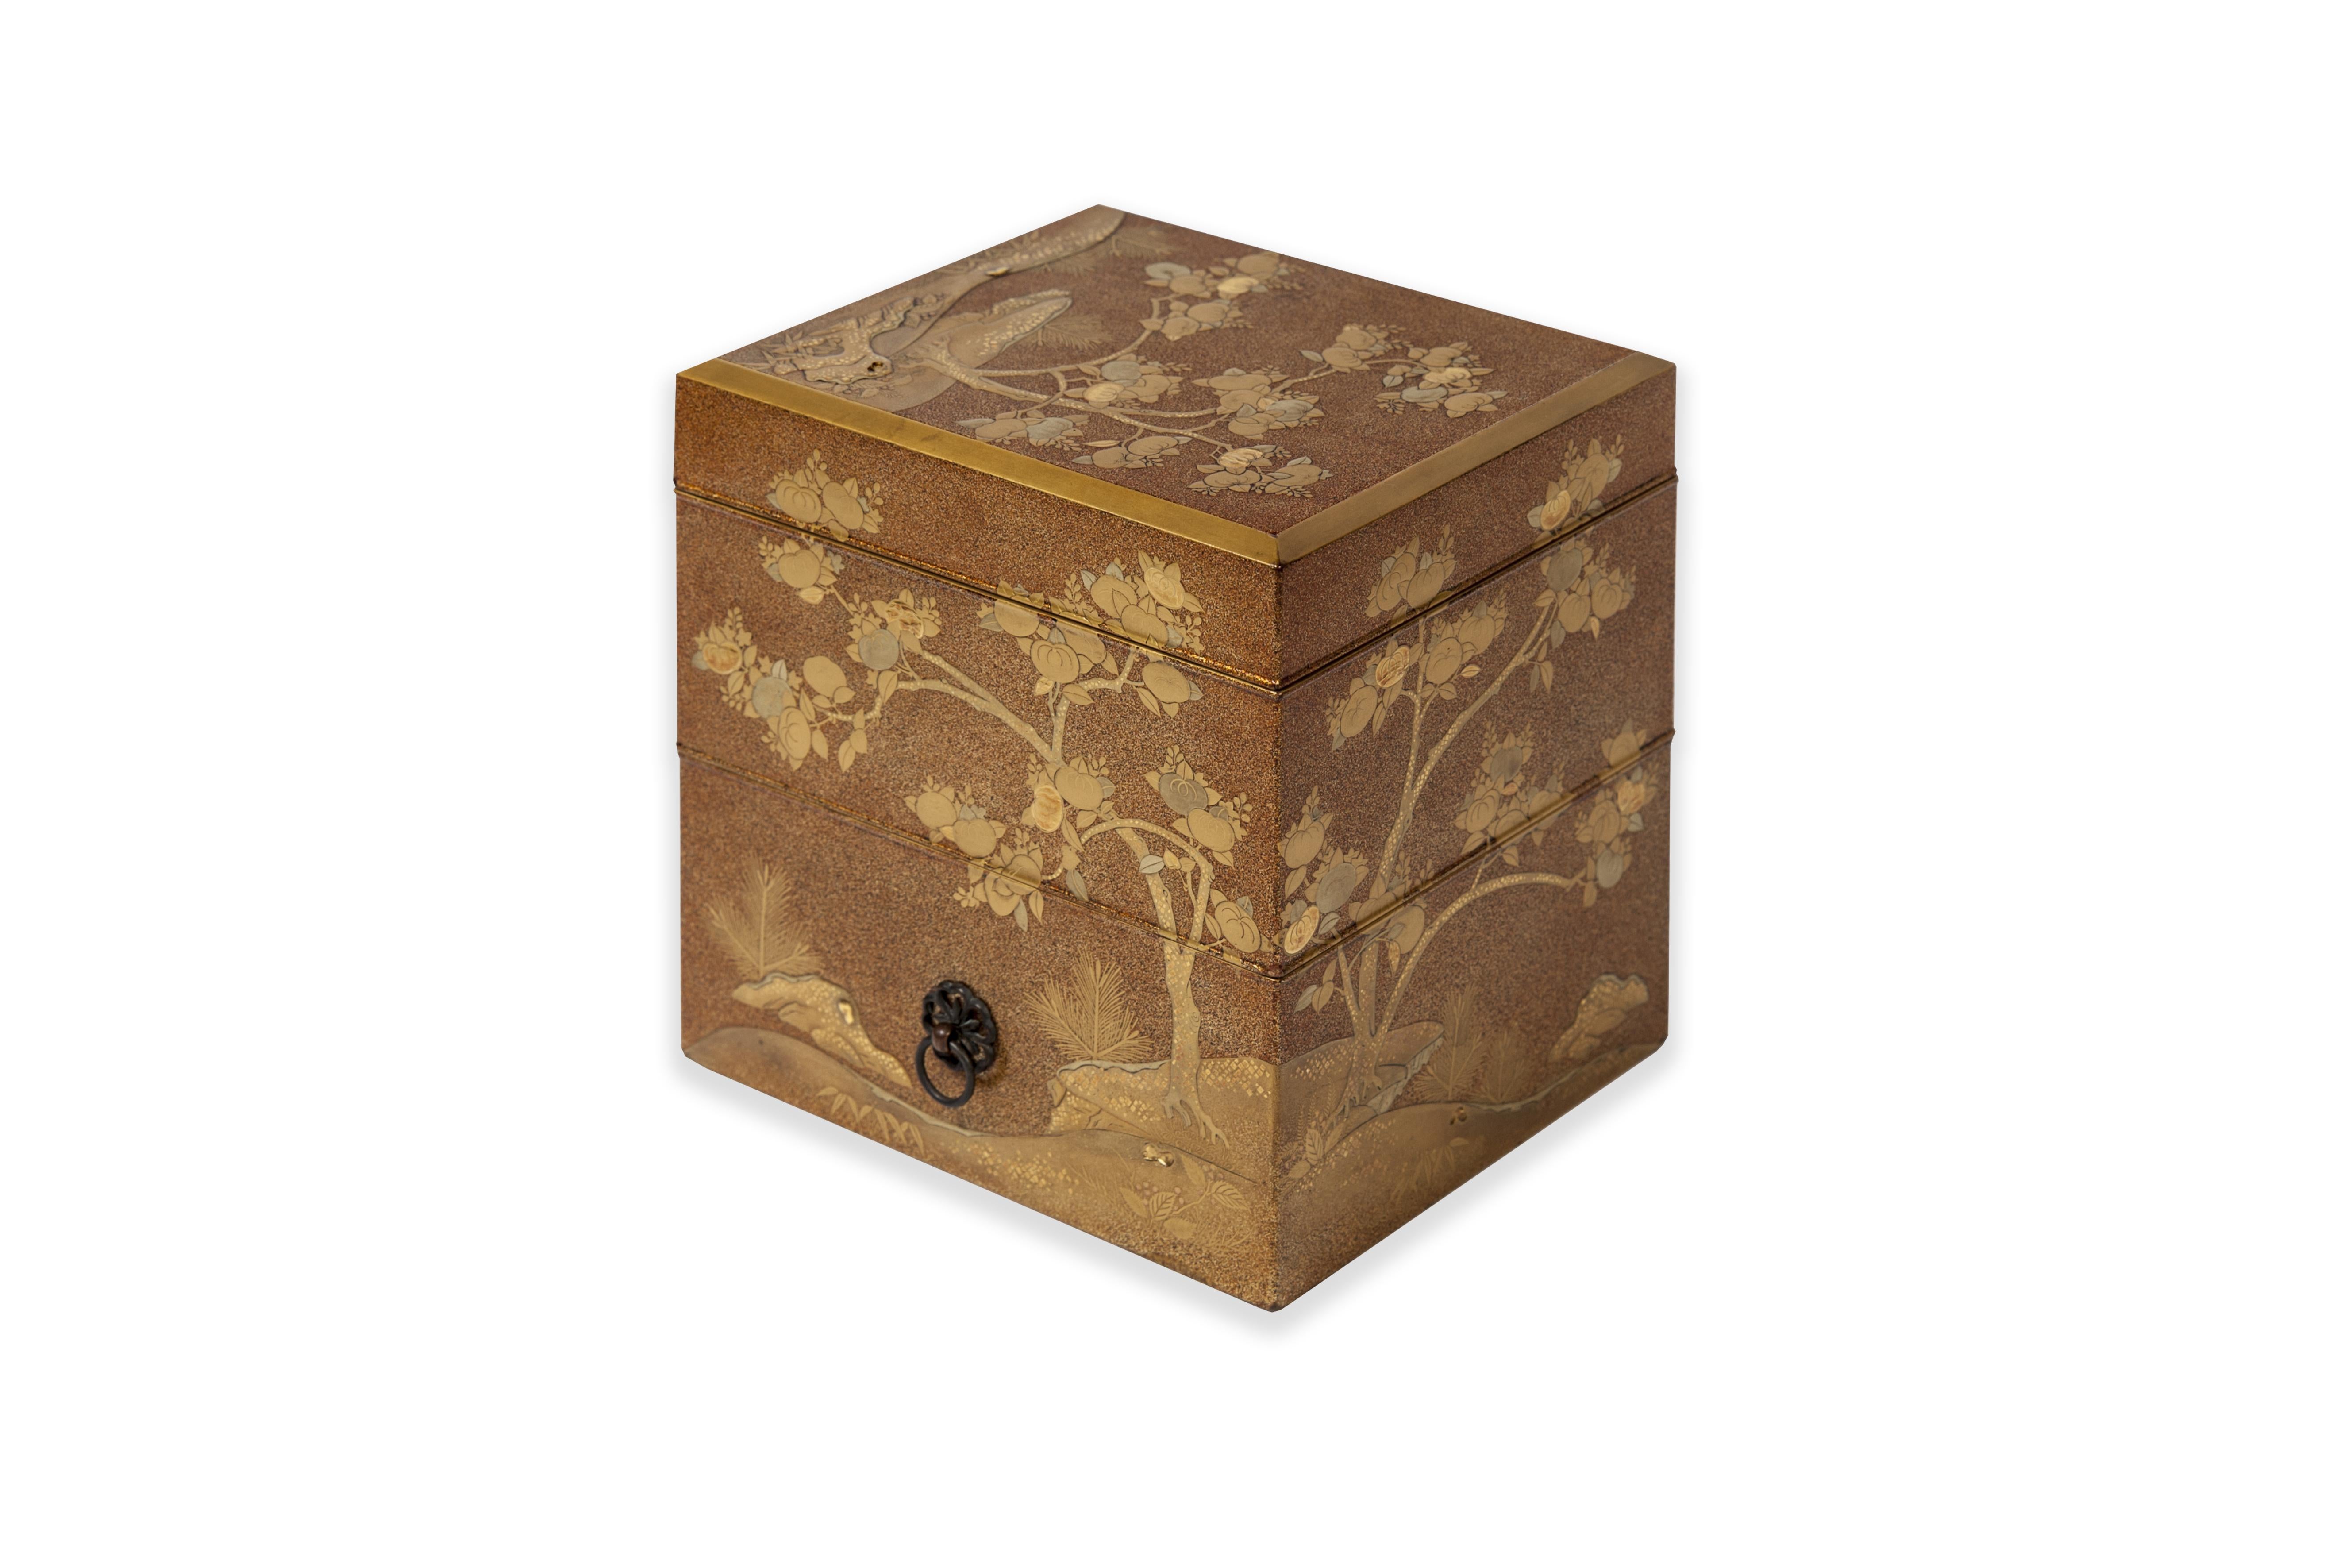 Tebako box with three compartments in golden and nashi-ji lacquer, decorated with golden, red, and kirigane lacquer, golden persimmon tree leaves, among rocks. The compartments are of increasing size from the top. The decoration is in continuity.